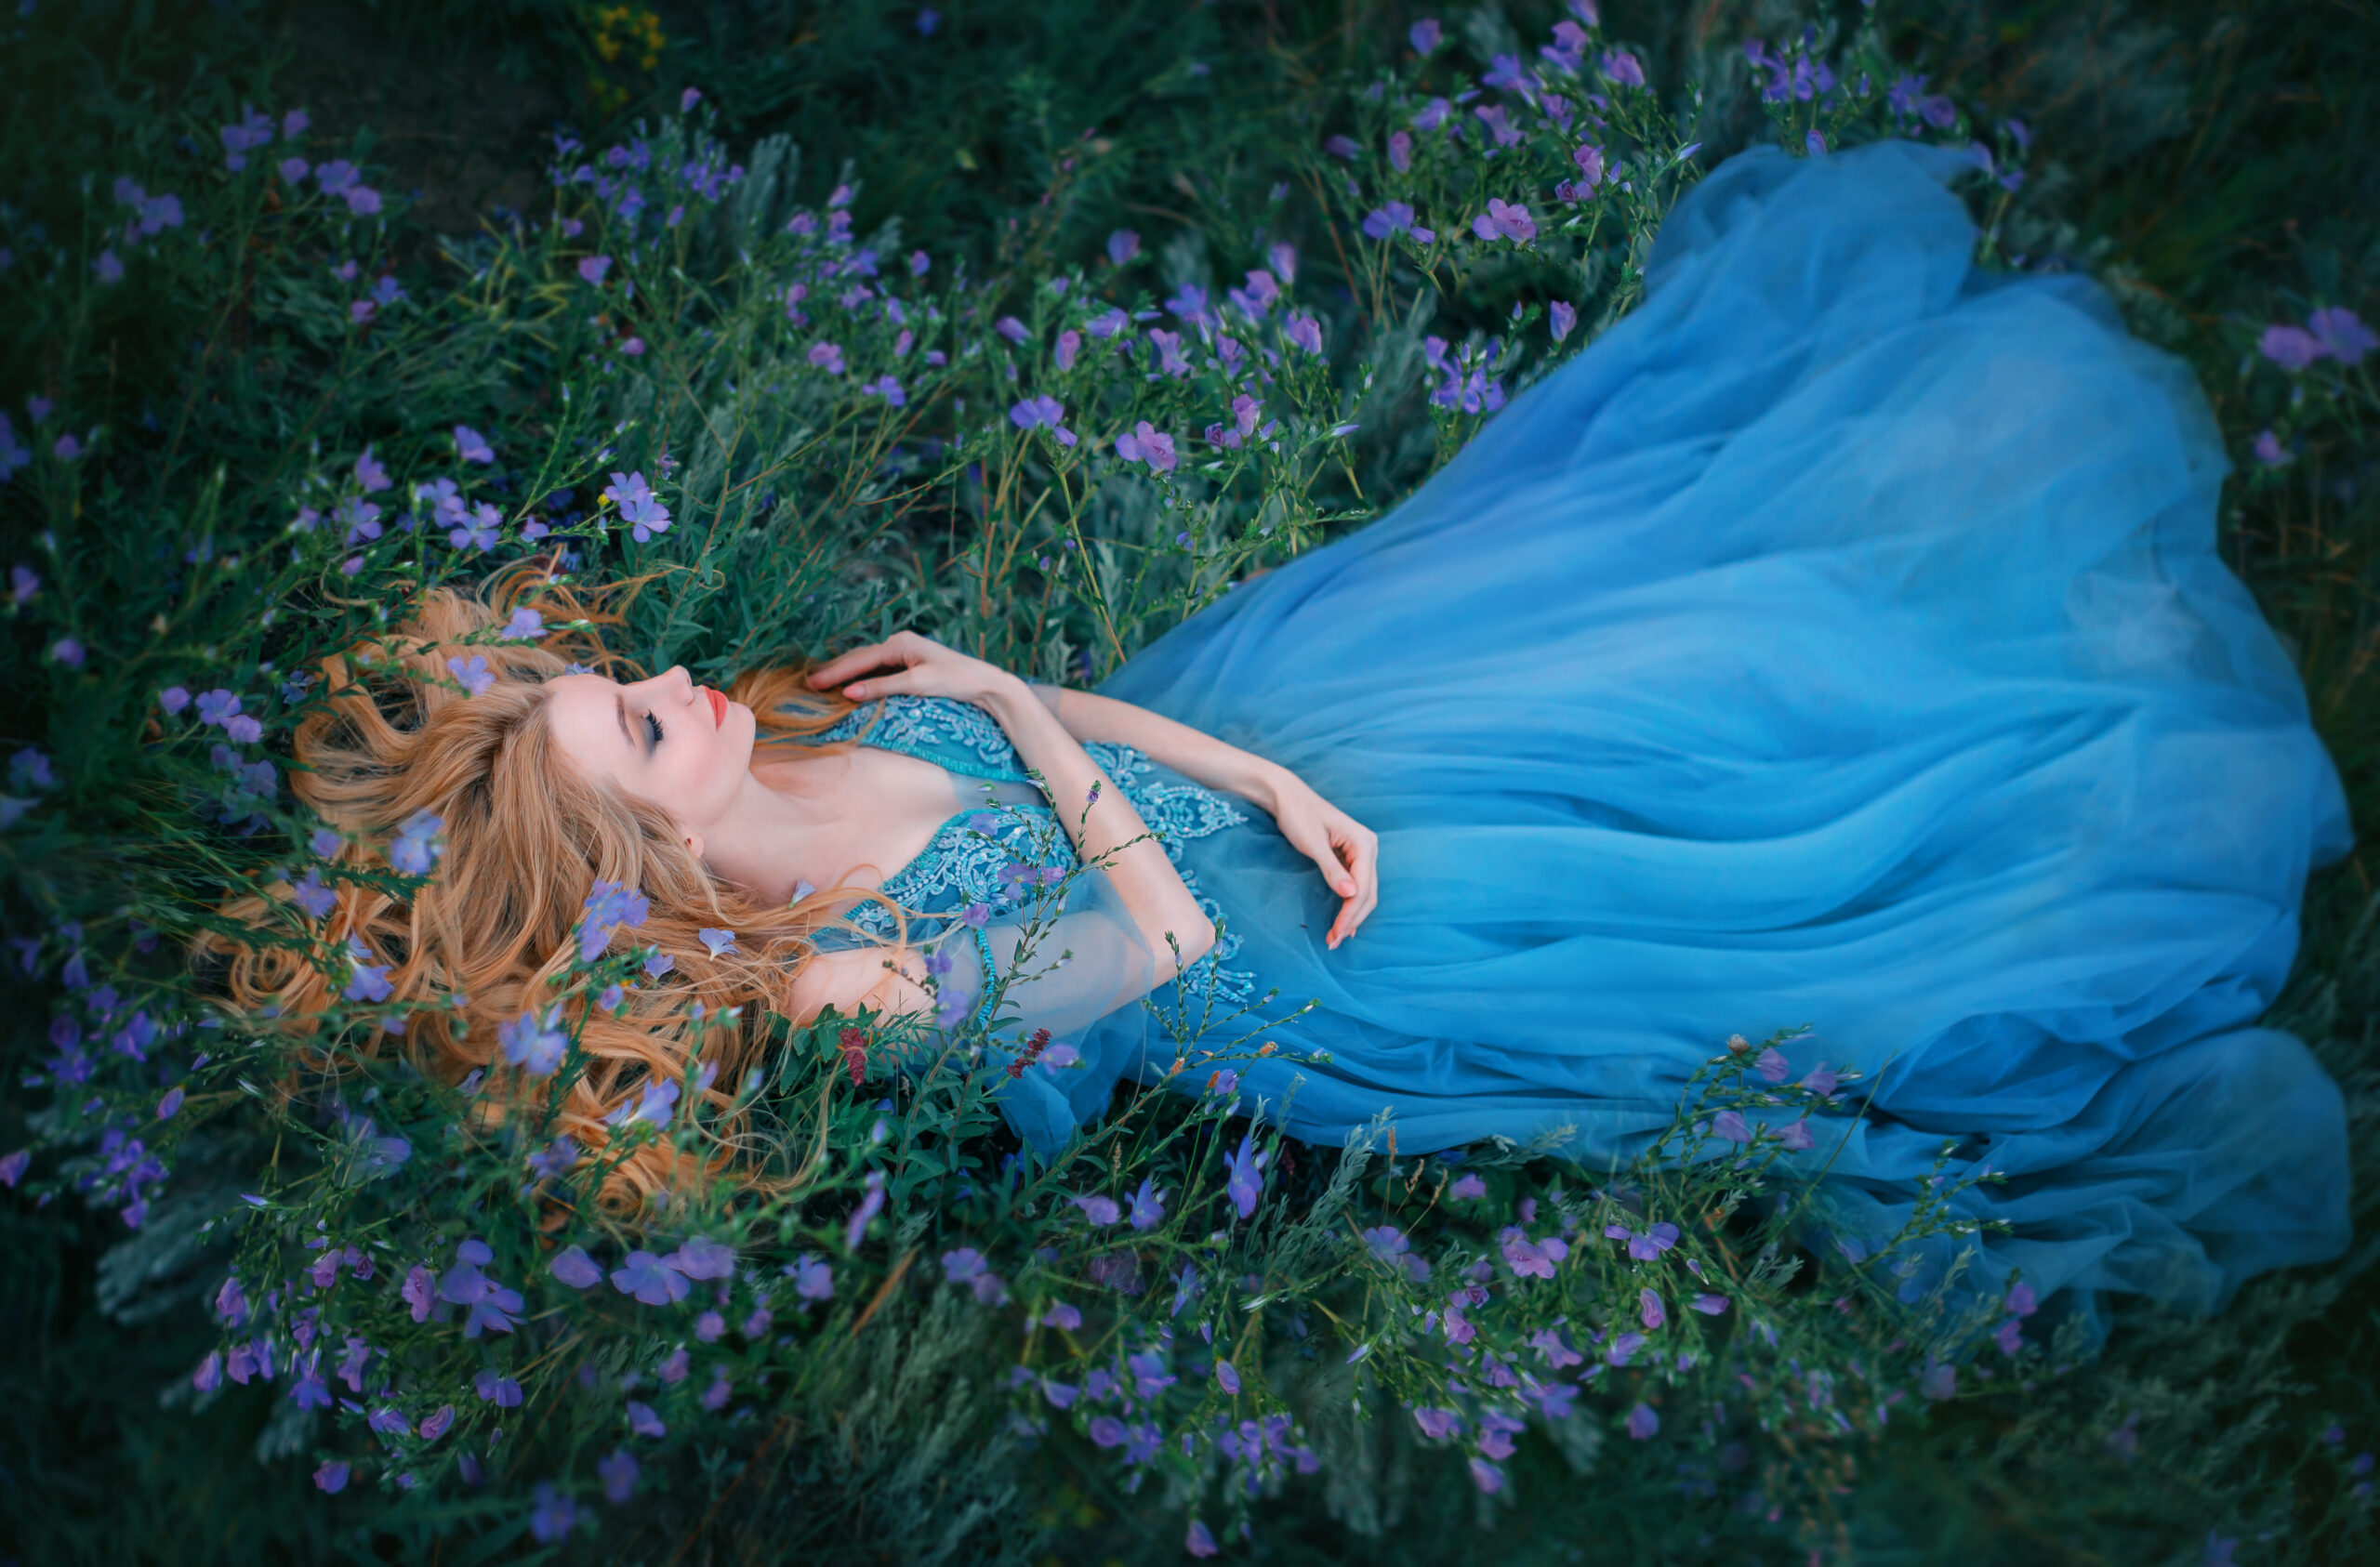 Sleeping fairytale beauty in gown on bed of grass and flowers.